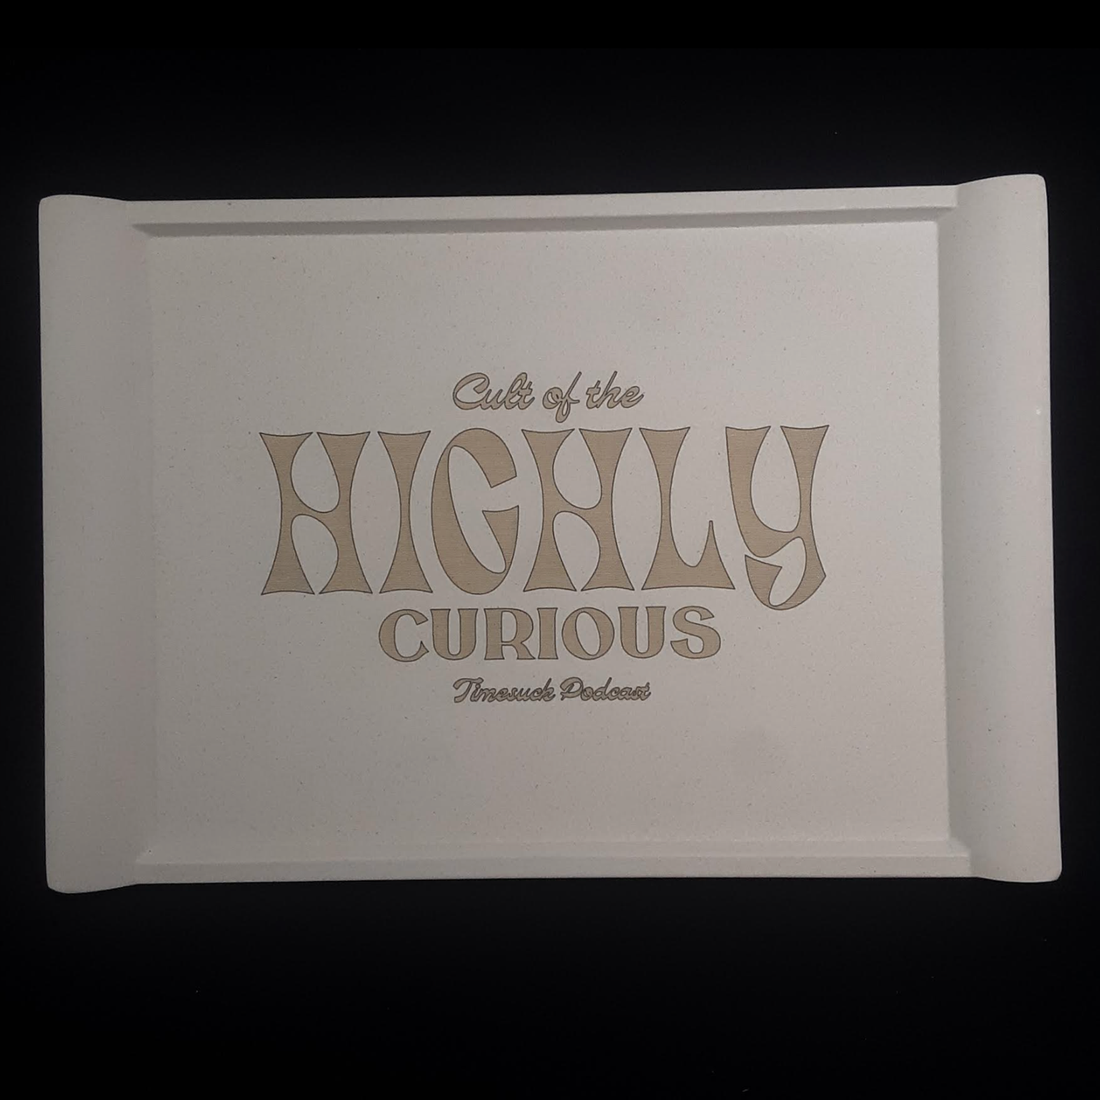 Highly Curious Bamboo Rolling Tray